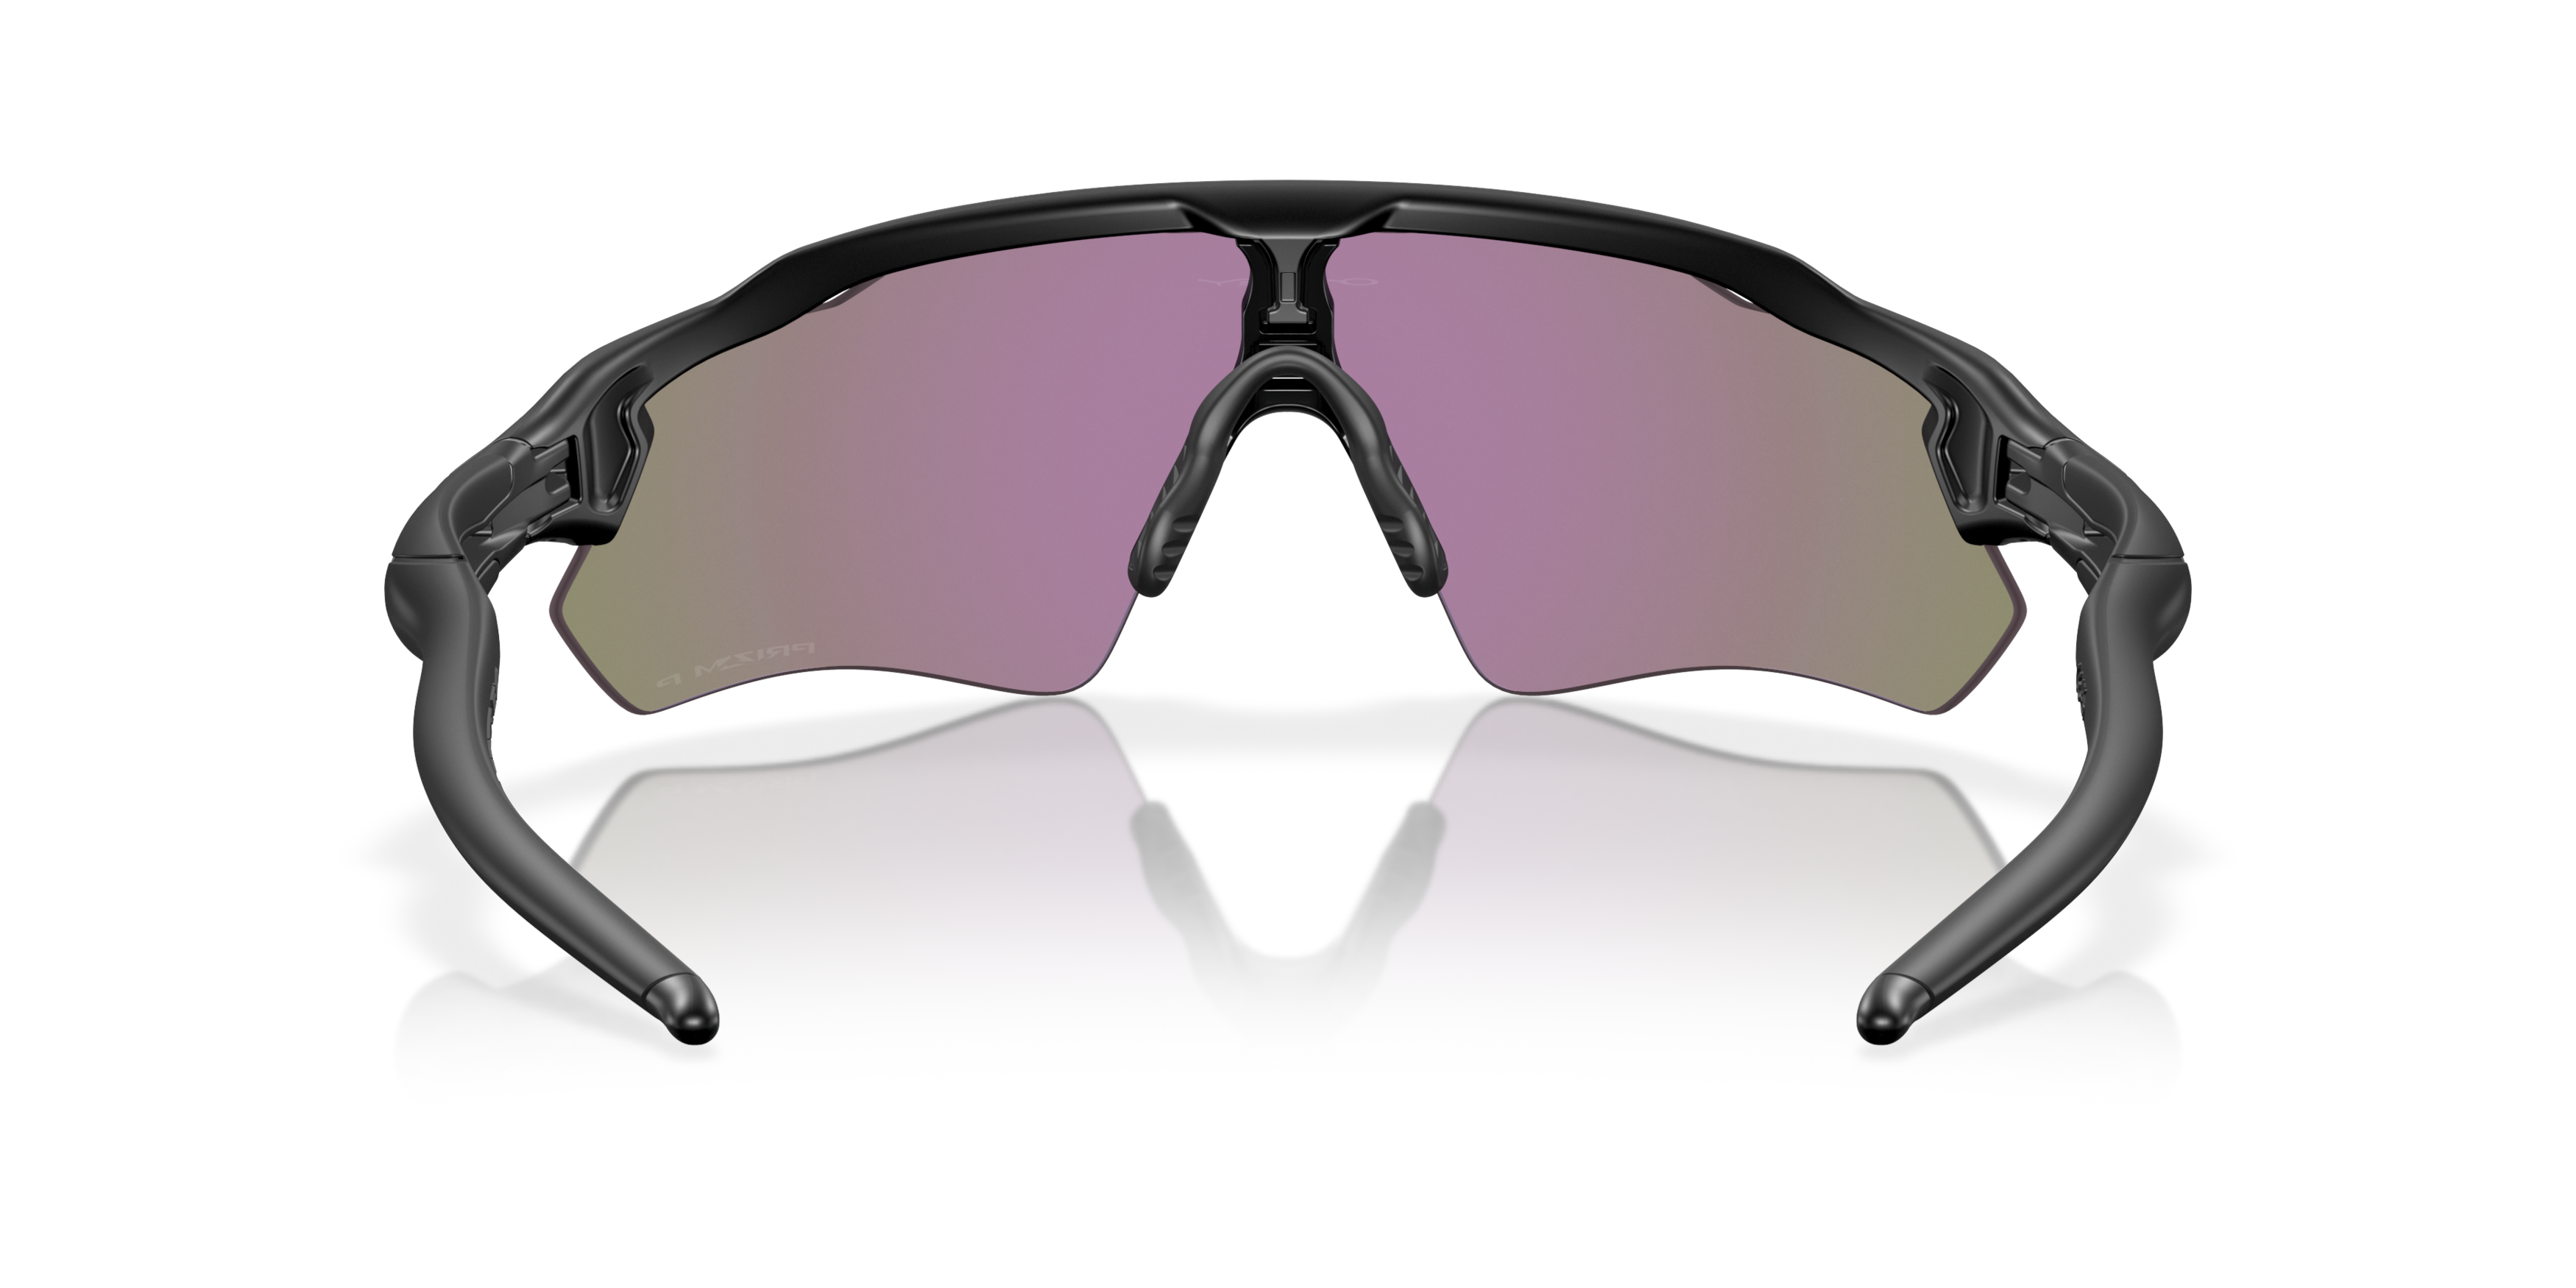 [products.image.detail02] Oakley Radar OO 9208 Sunglasses